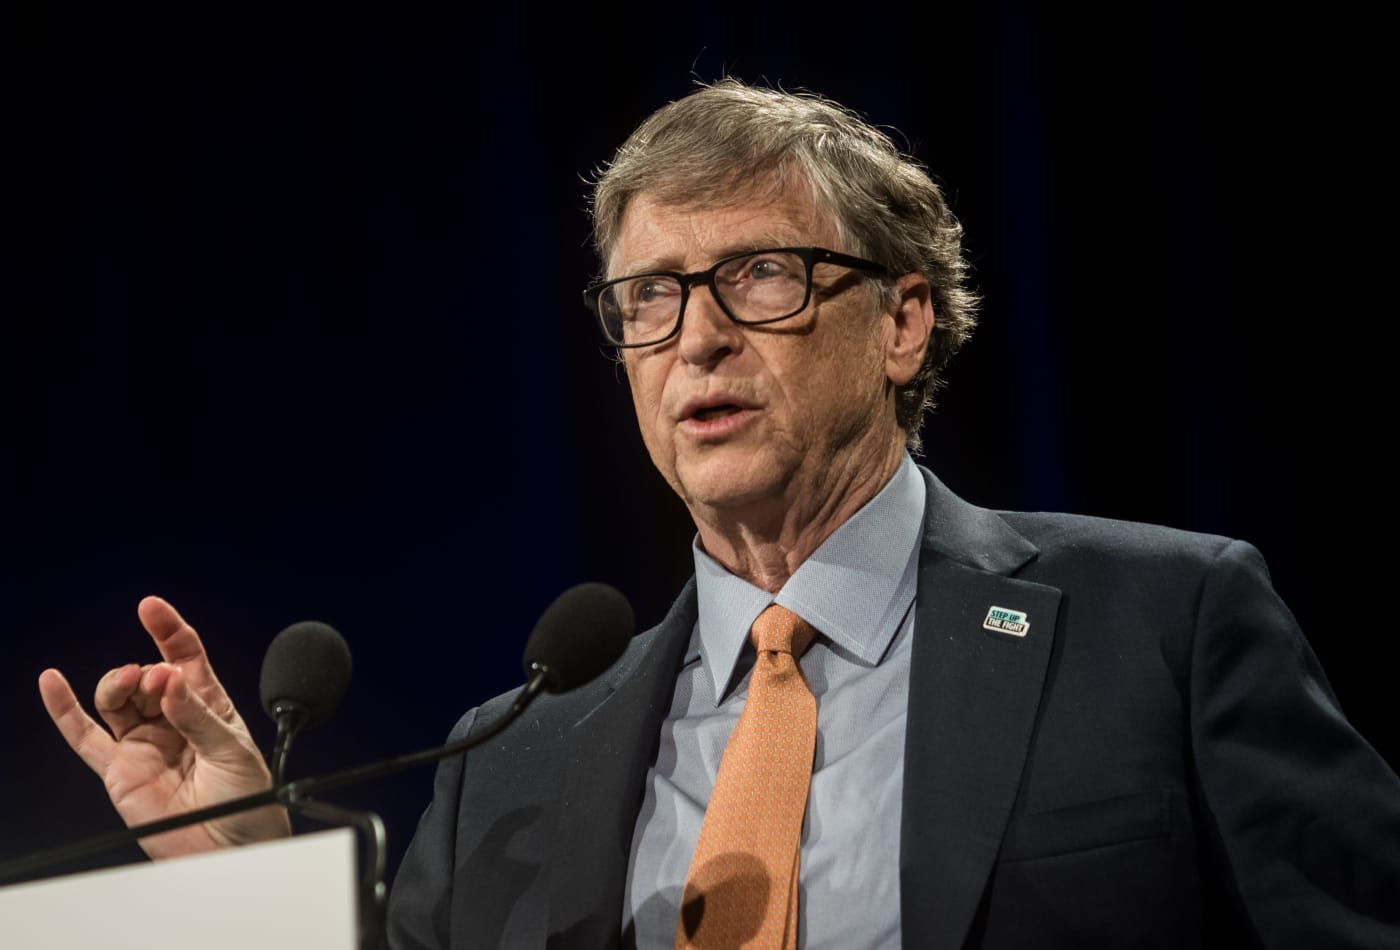 Bill Gates delivers a speech at the fundraising day at the Sixth World Fund Conference in Lyon, France, on October 10, 2019.